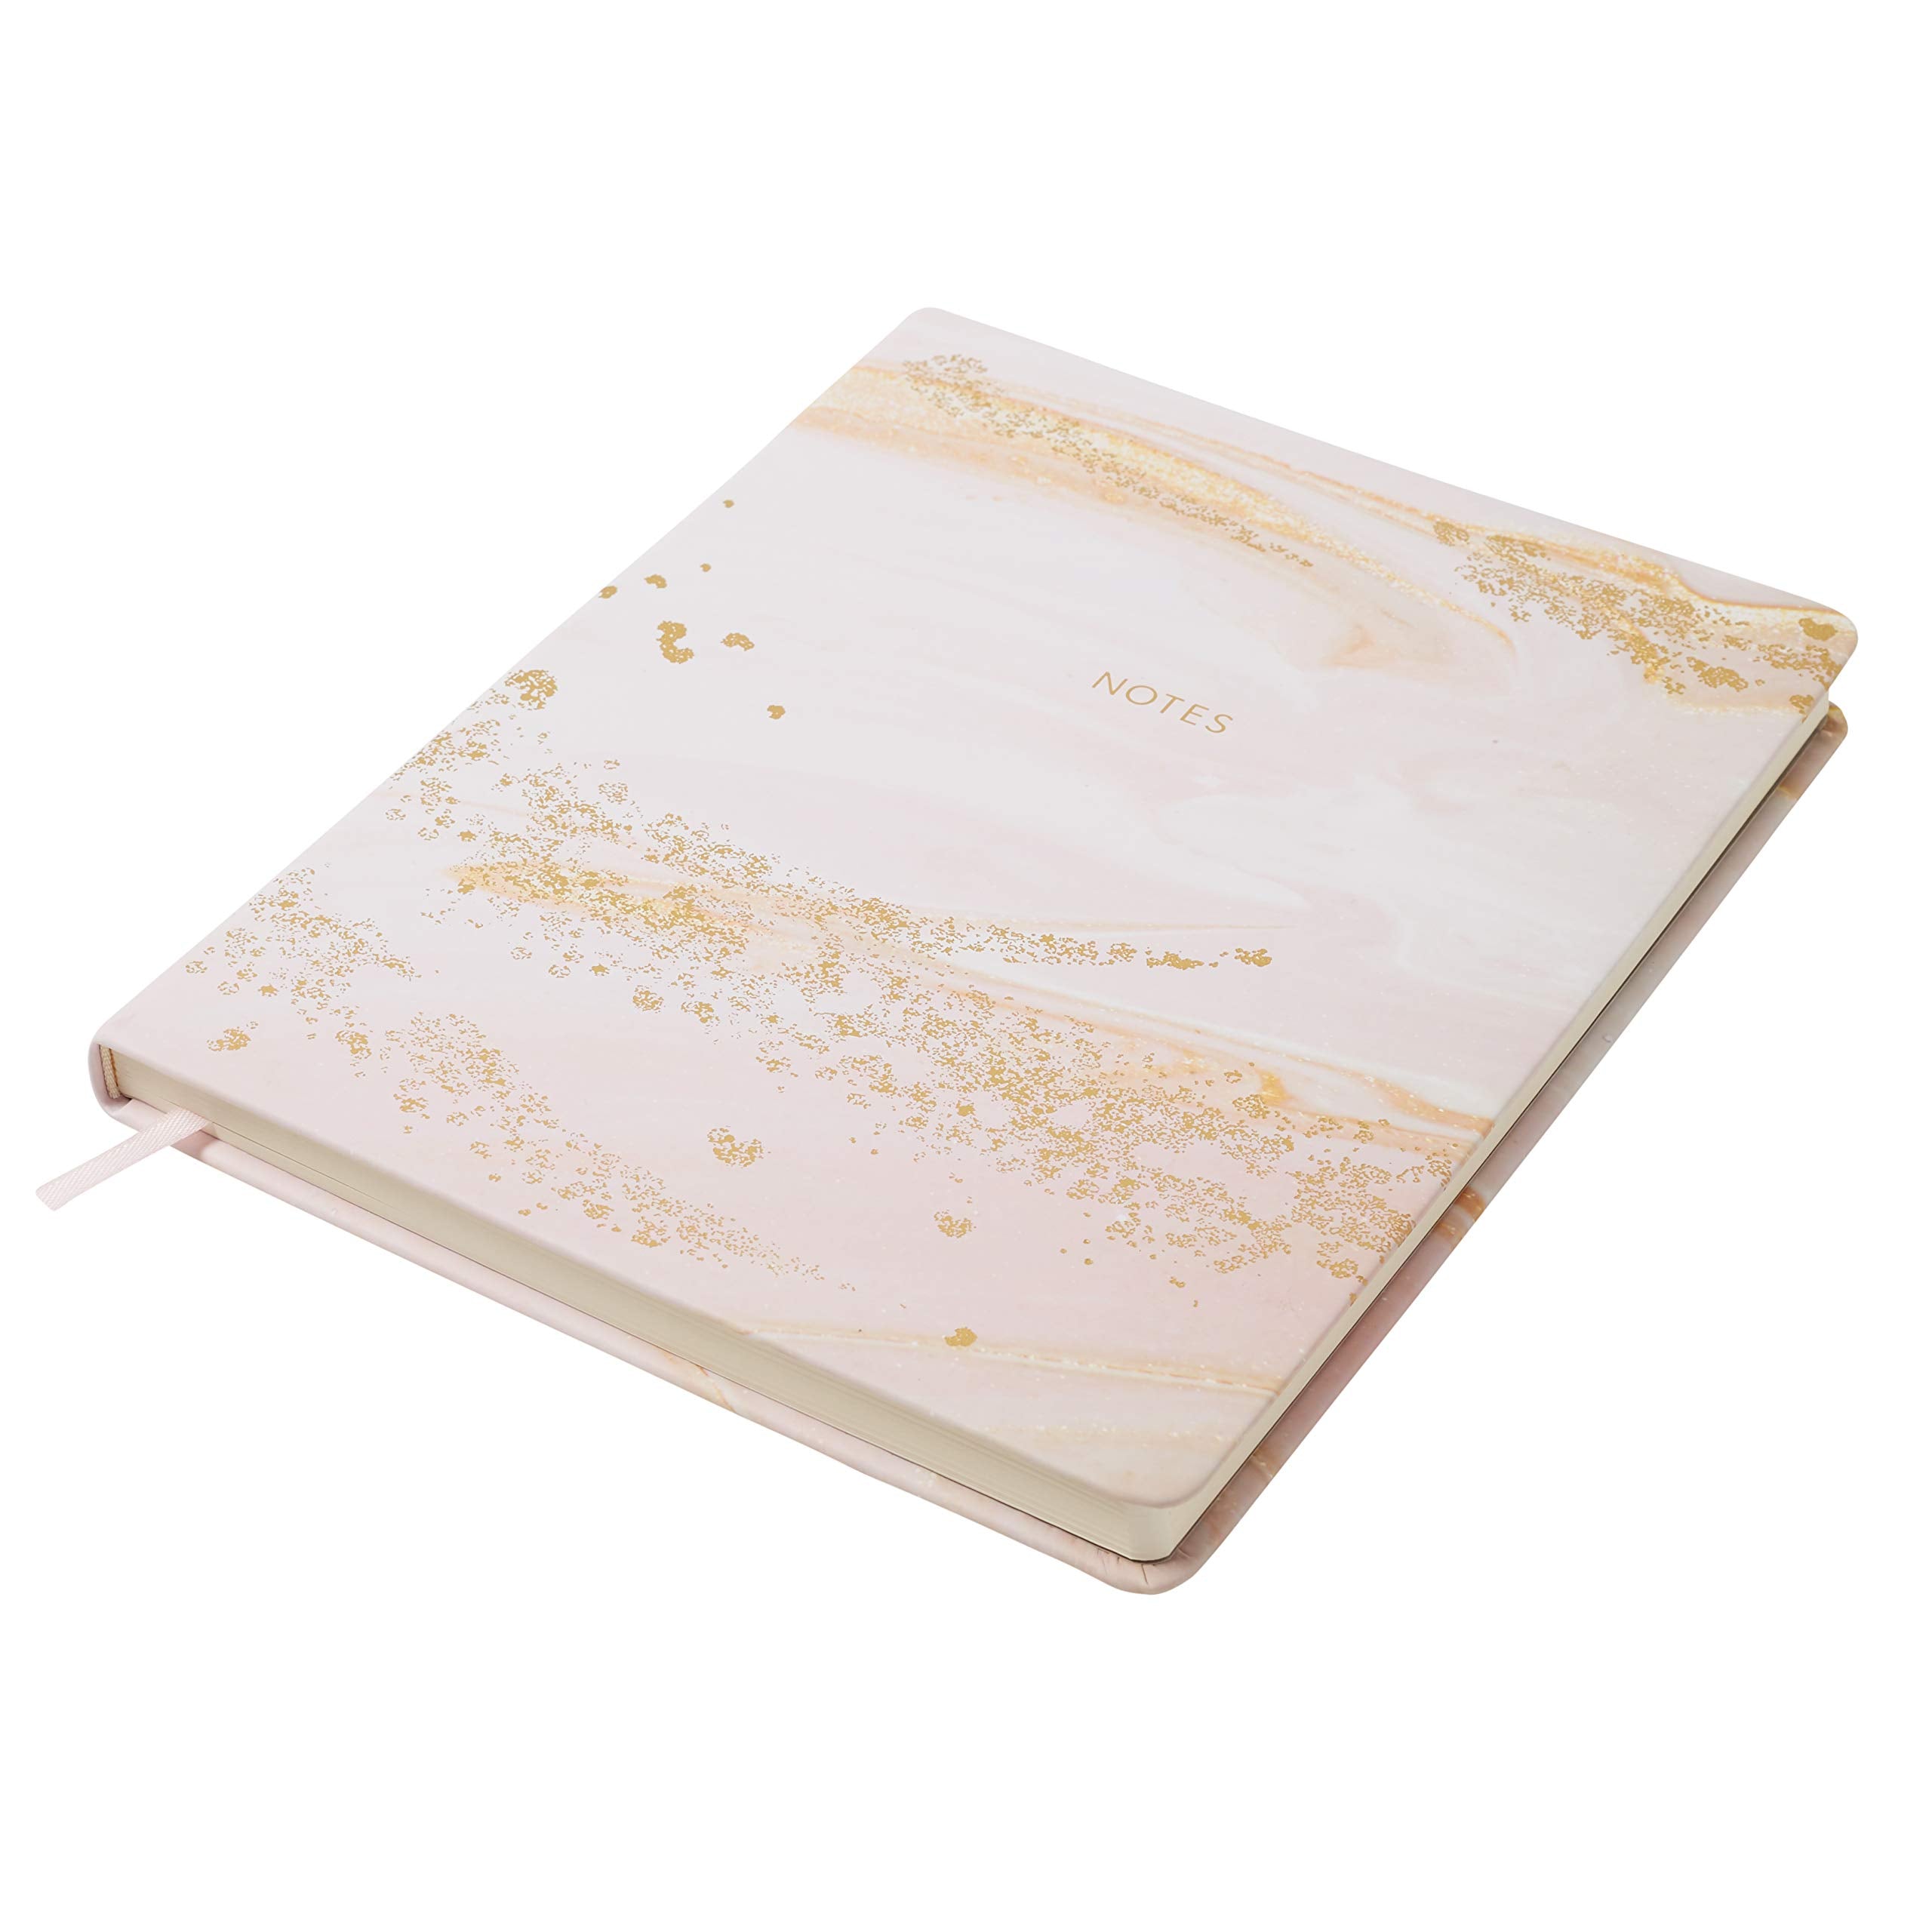 Gold Foil Marble Journal Pink 8x10 inches